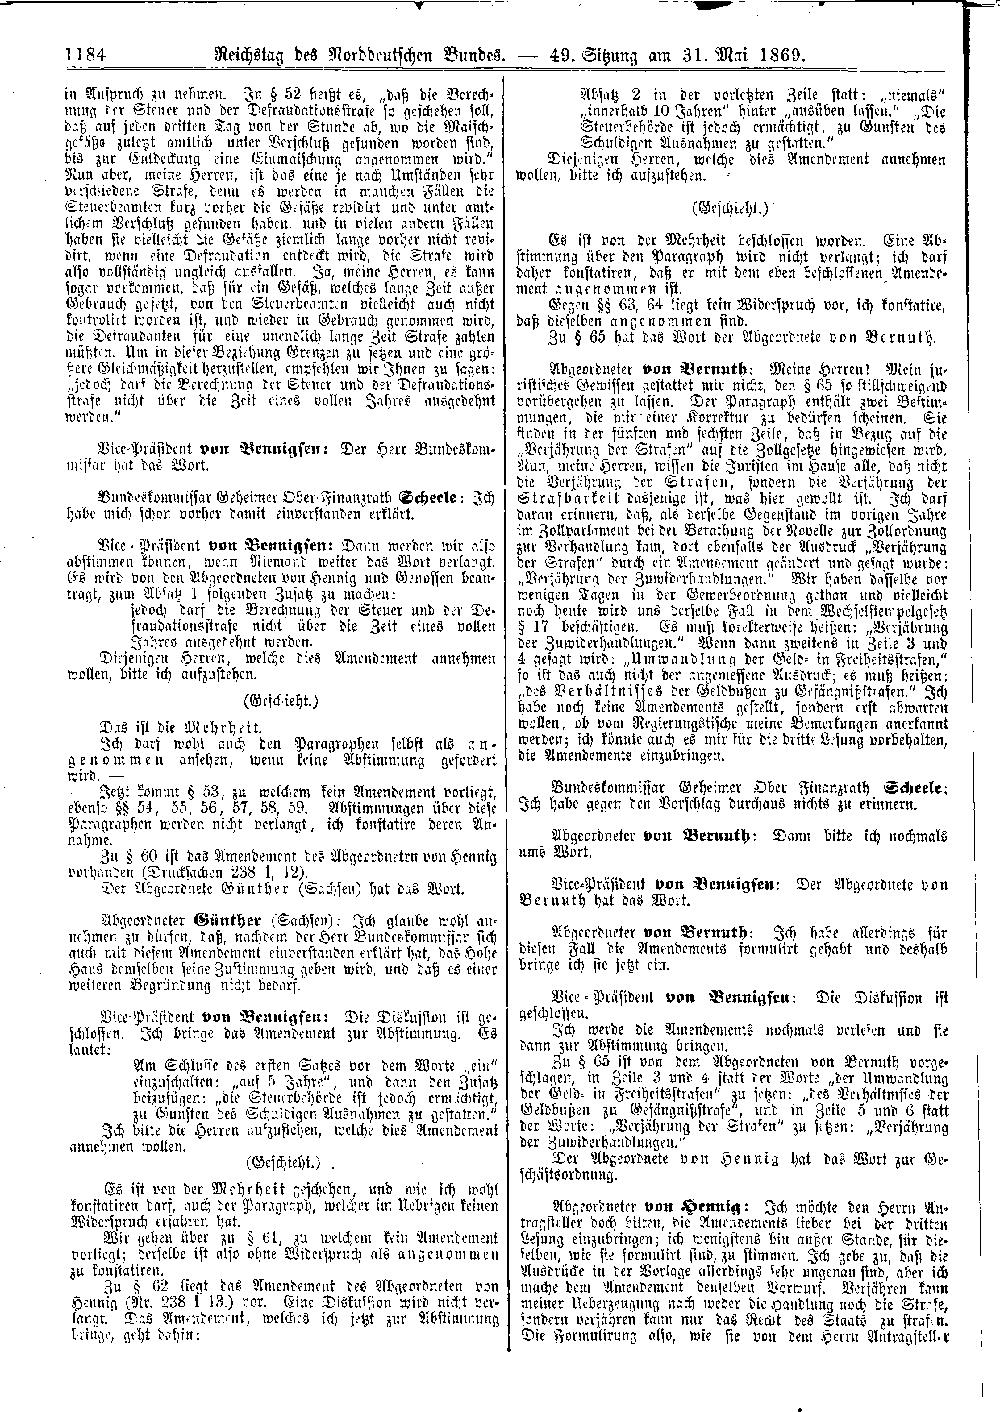 Scan of page 1184